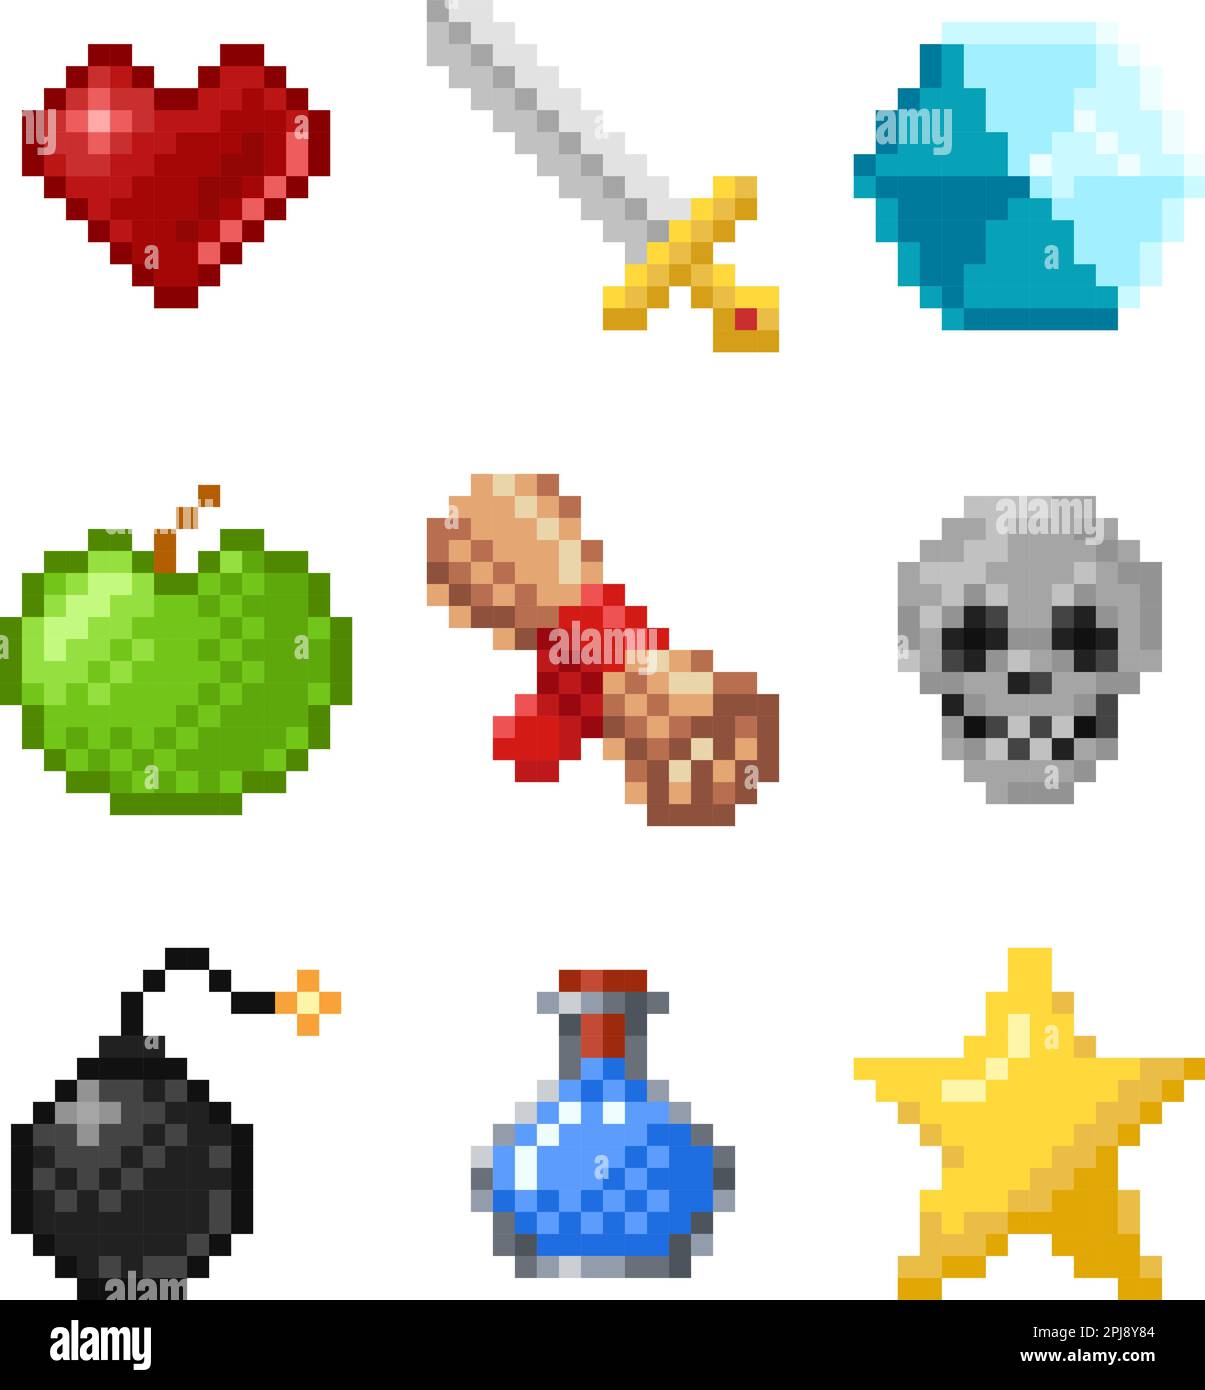 Set of pixel art objects. Retro game 8 bit style icons collection. Heart, sword, blue jewel, green apple, scroll, skull, bomb, mana elixir and star. V Stock Vector